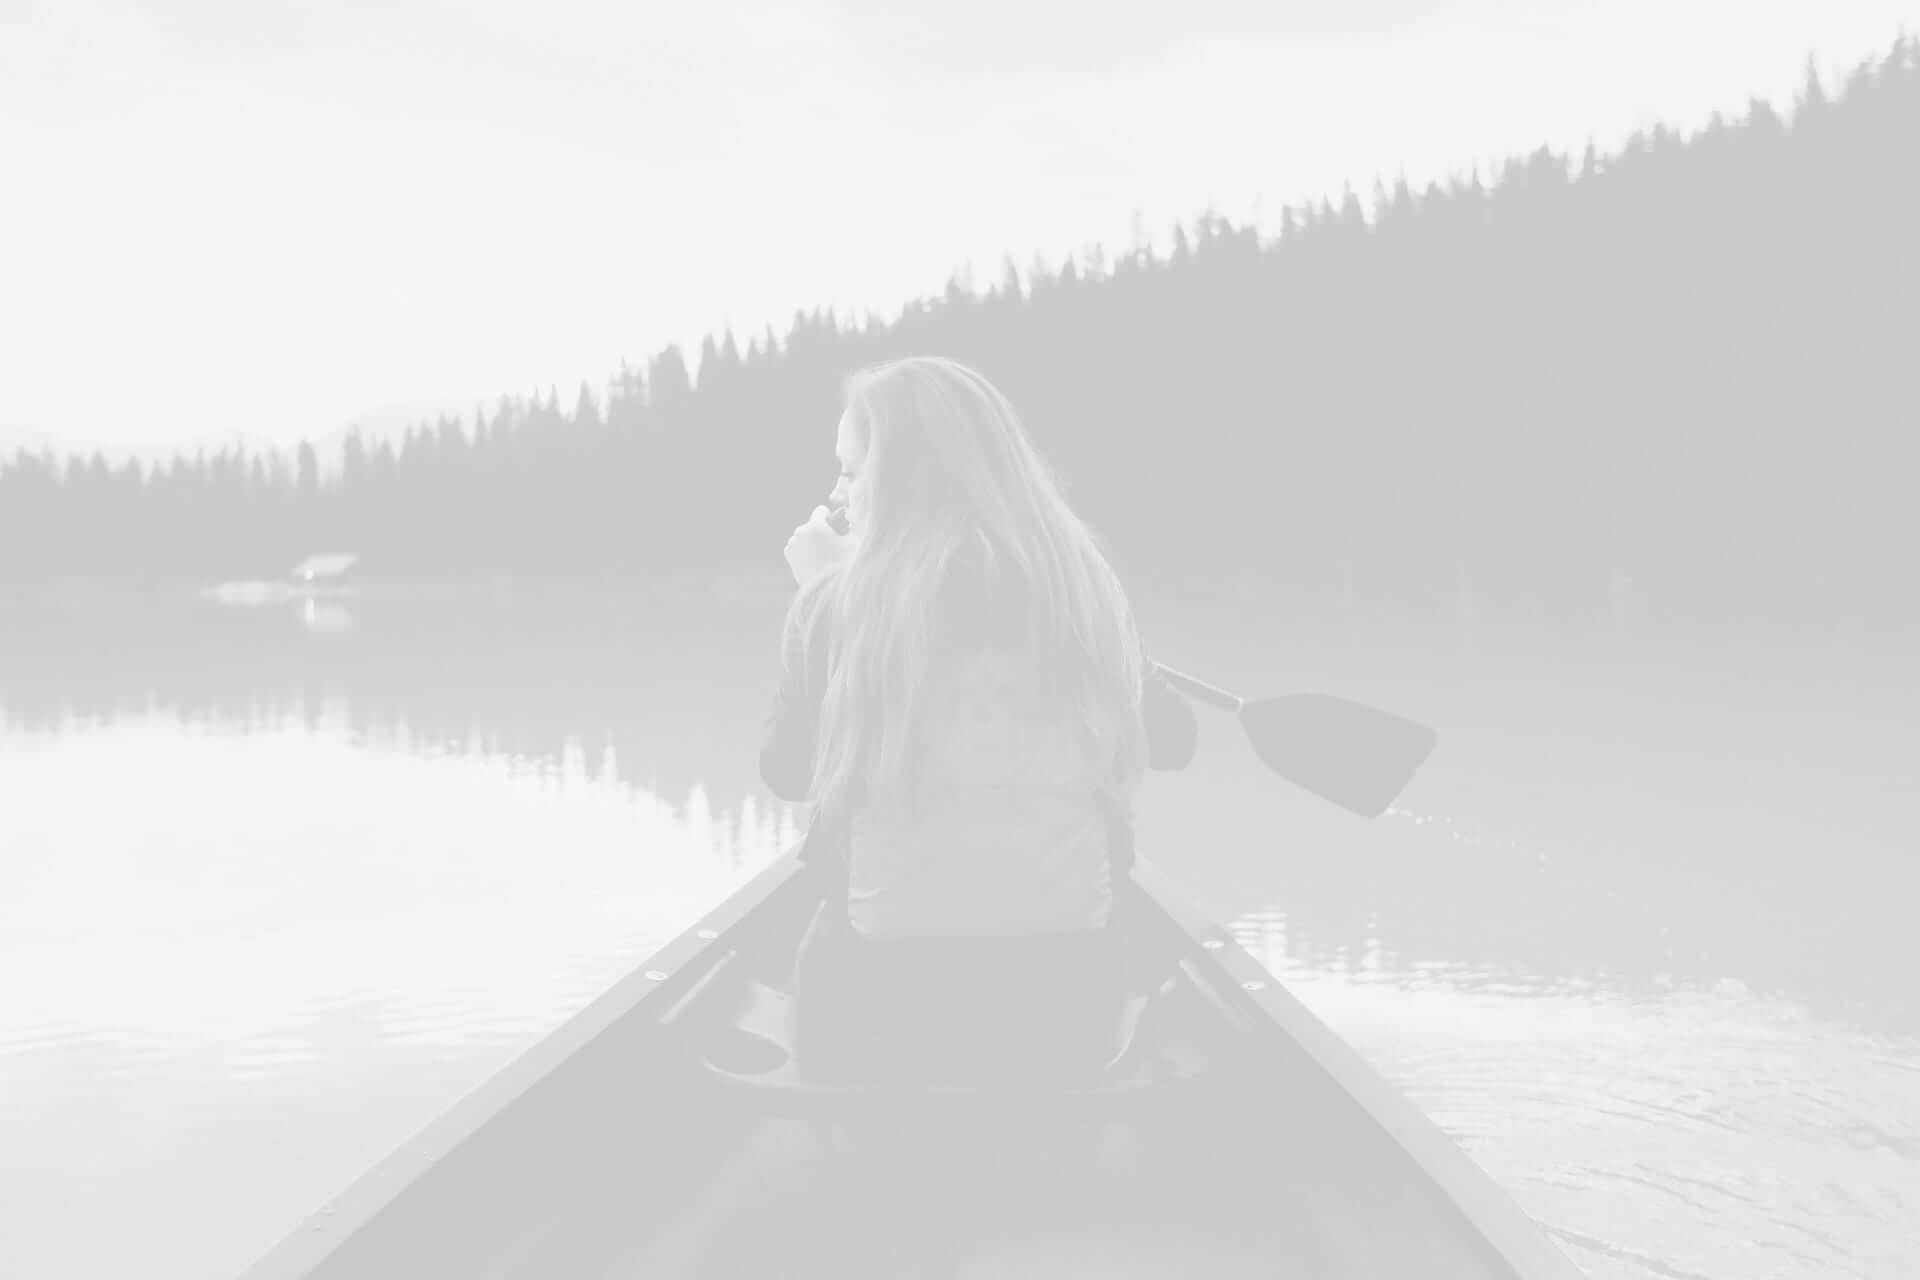 Woman sitting in a canoe on a calm lake, holding a paddle, with a backdrop of a forested hill under a cloudy sky.